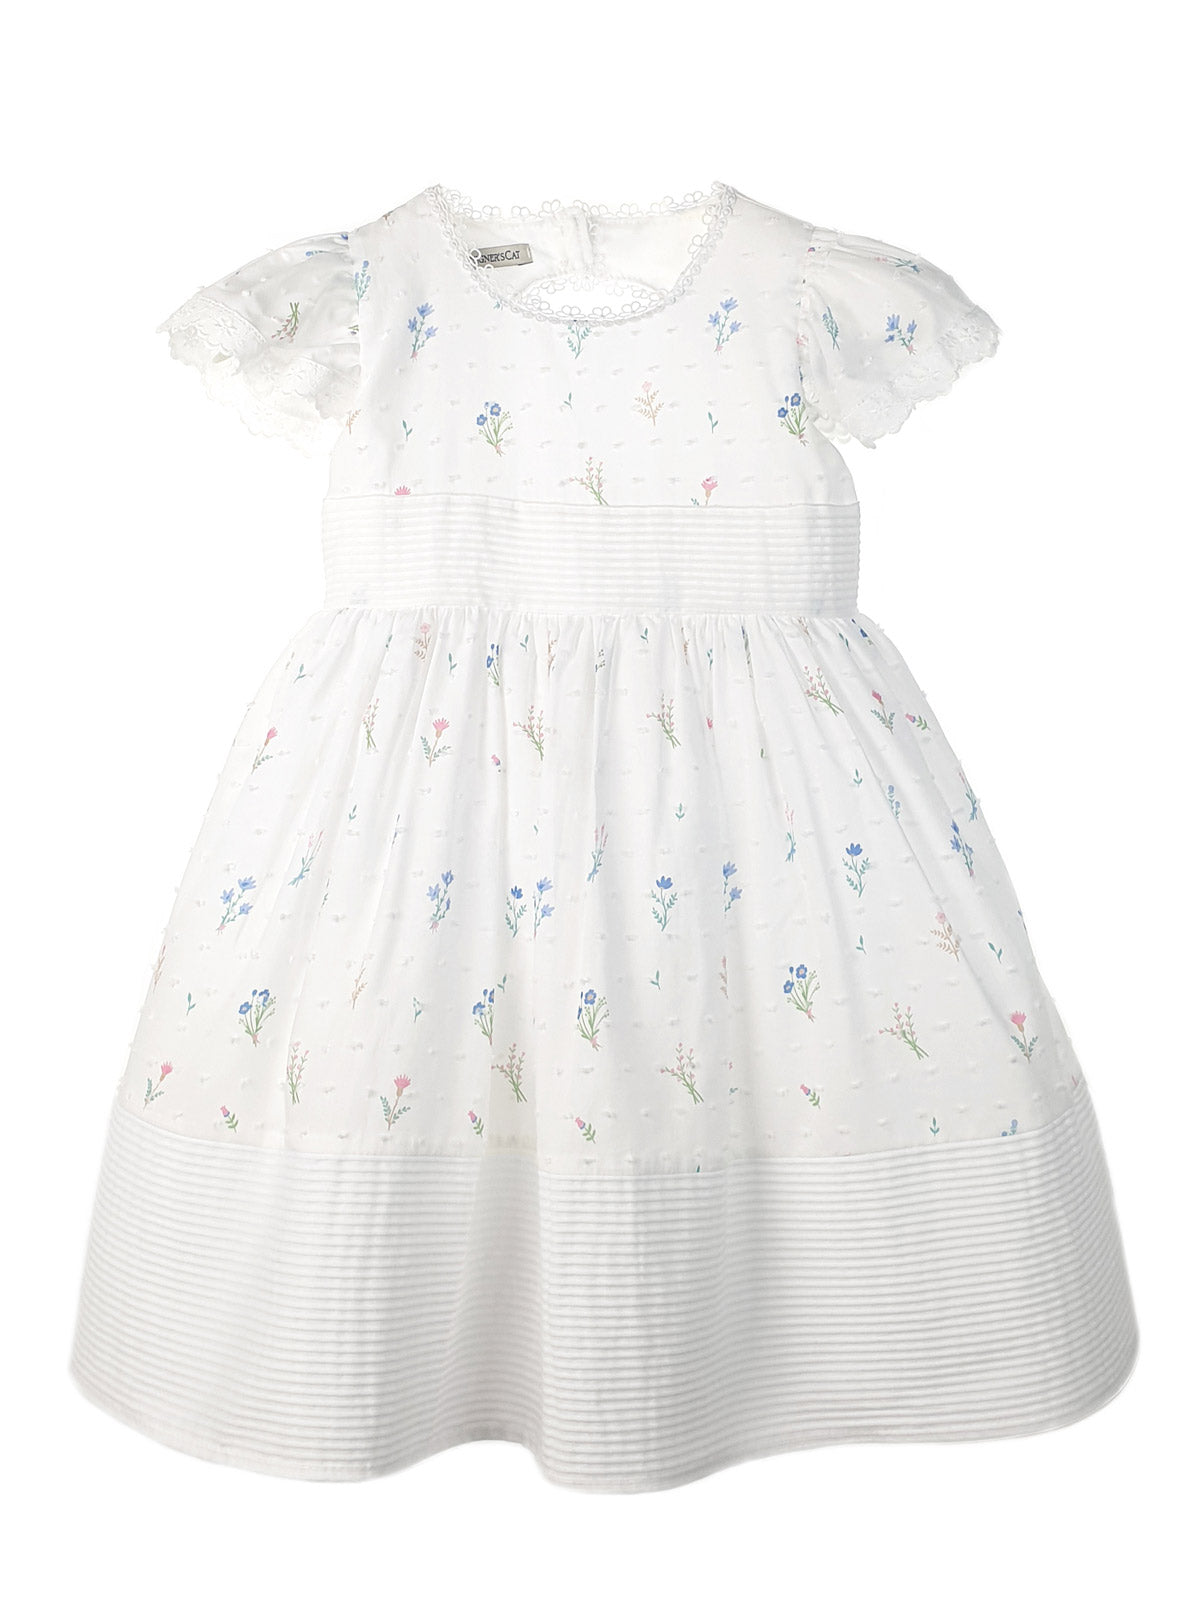 Girl's cotton floral dress with polka dots - RAQUELLE